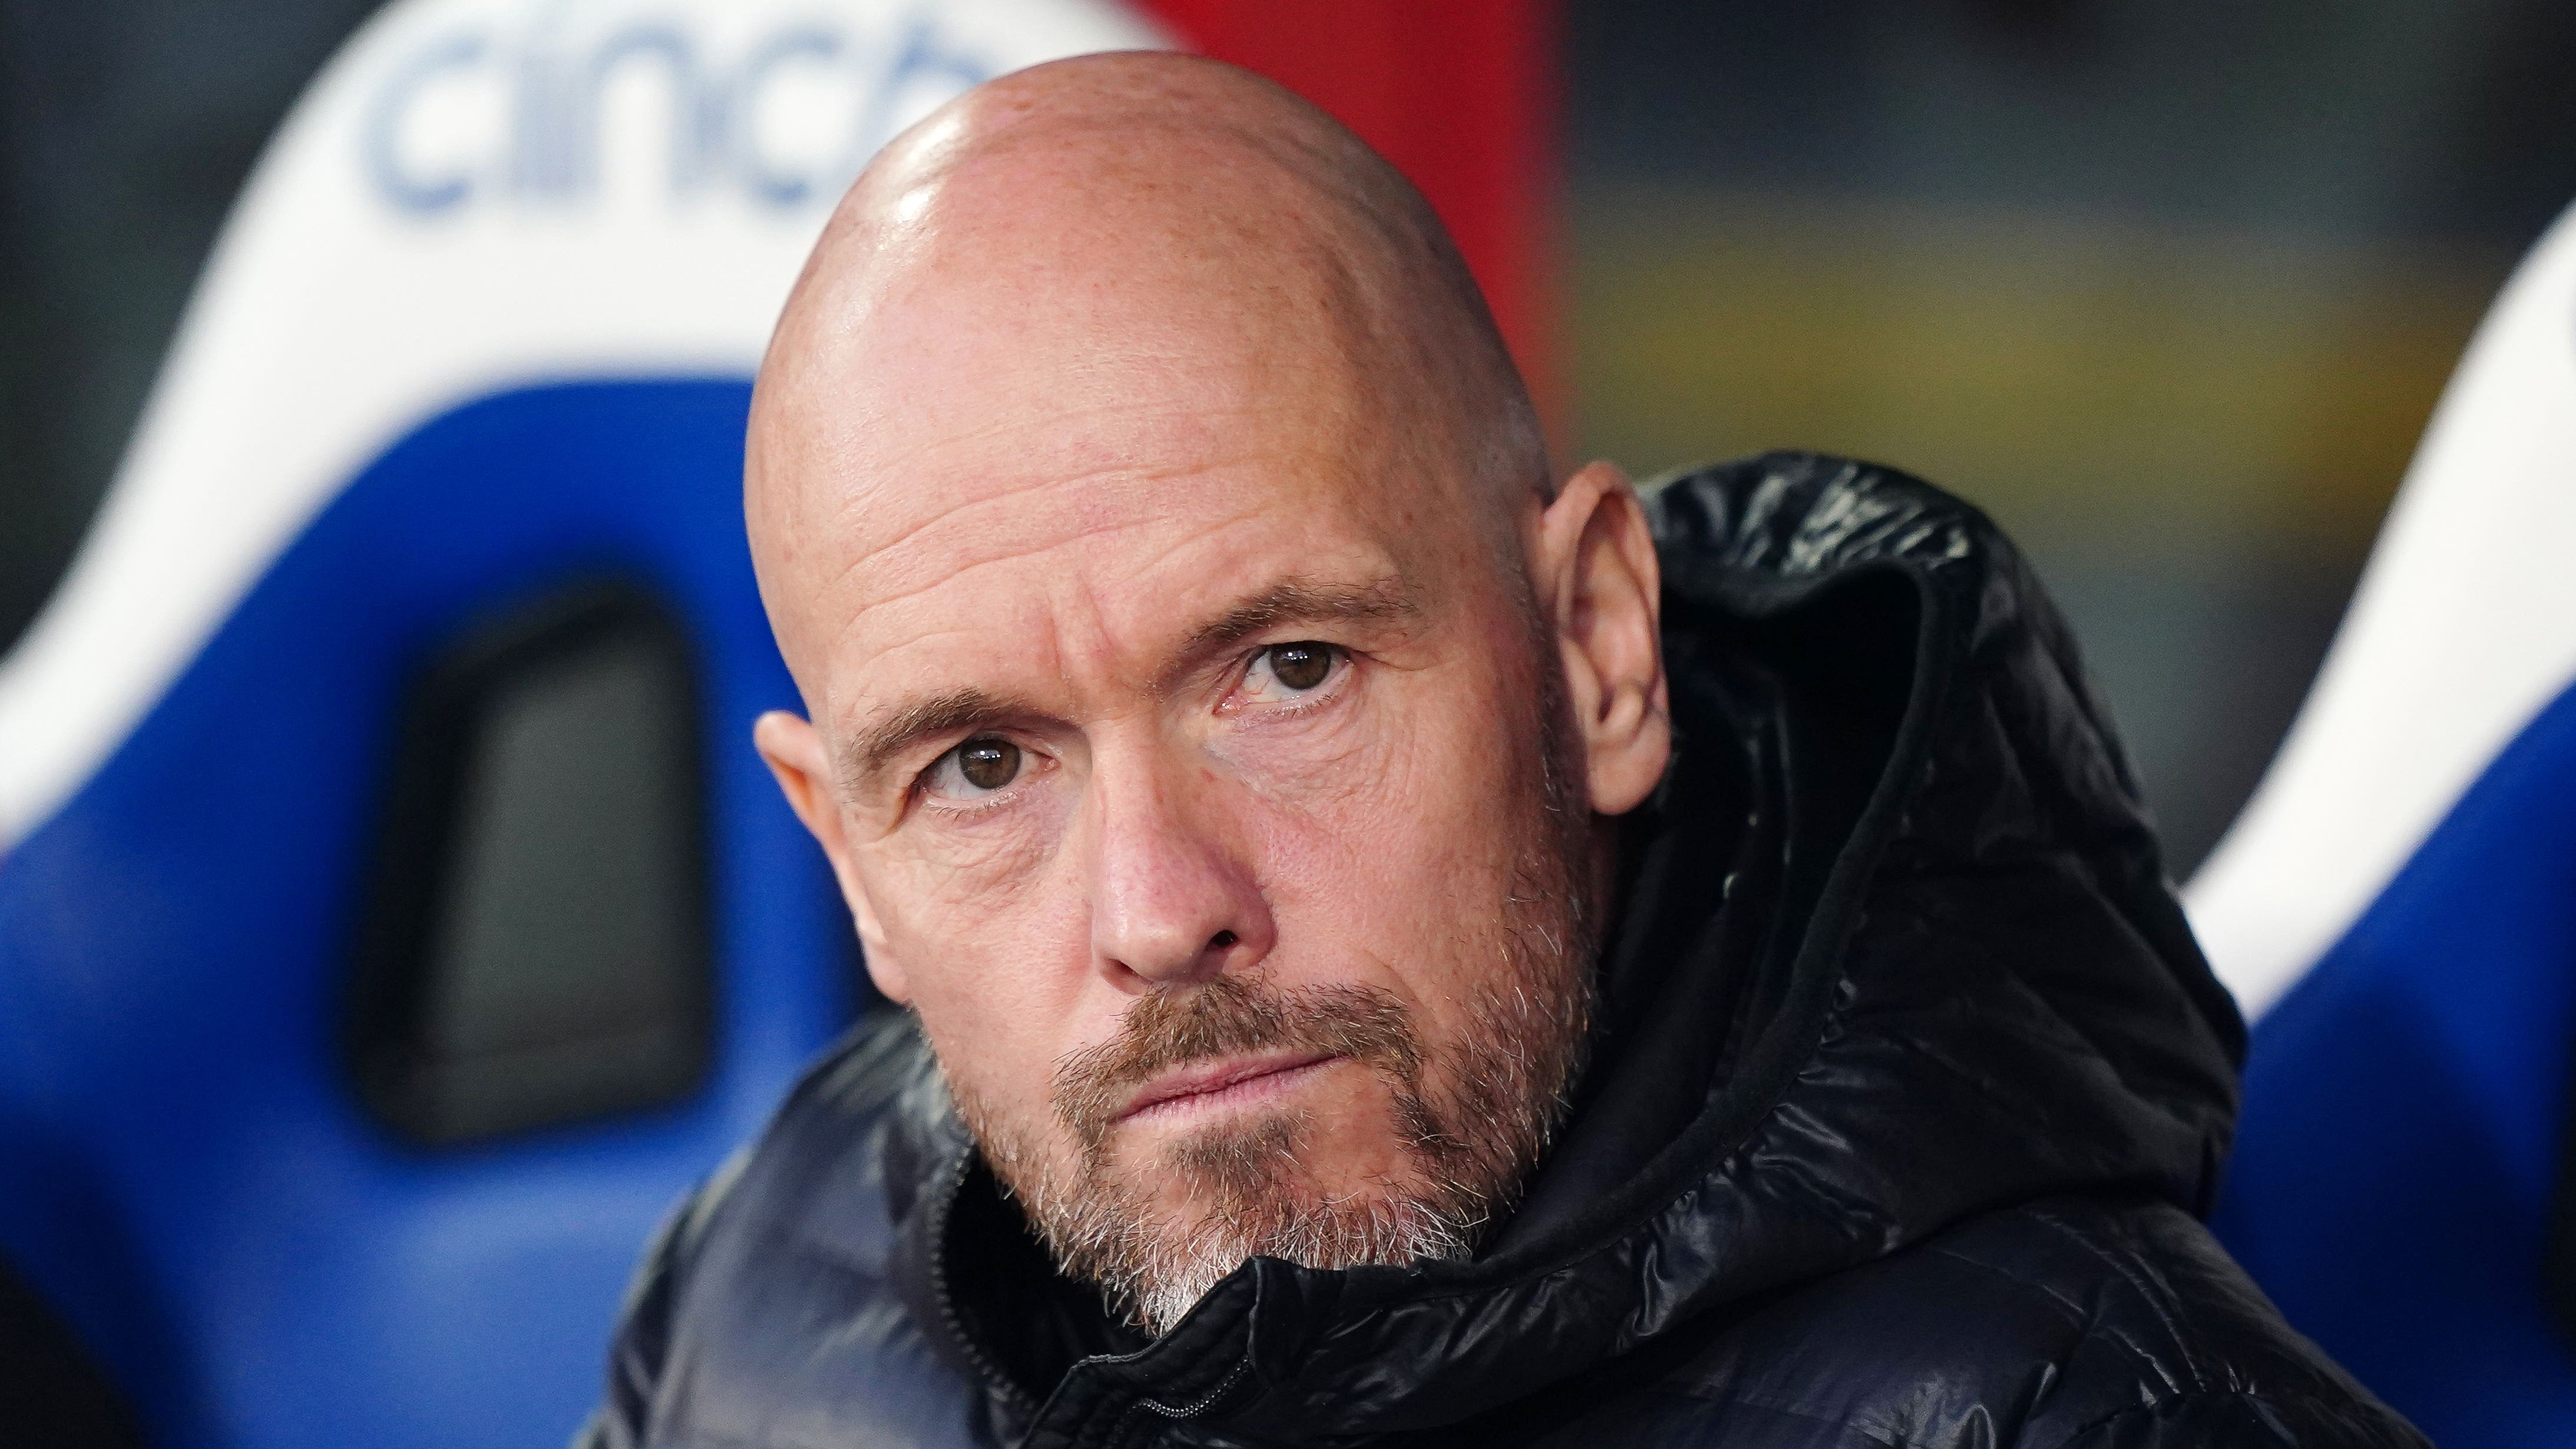 Manchester United boss Erik ten Hag rues ‘worst defeat’ but vows to fight on